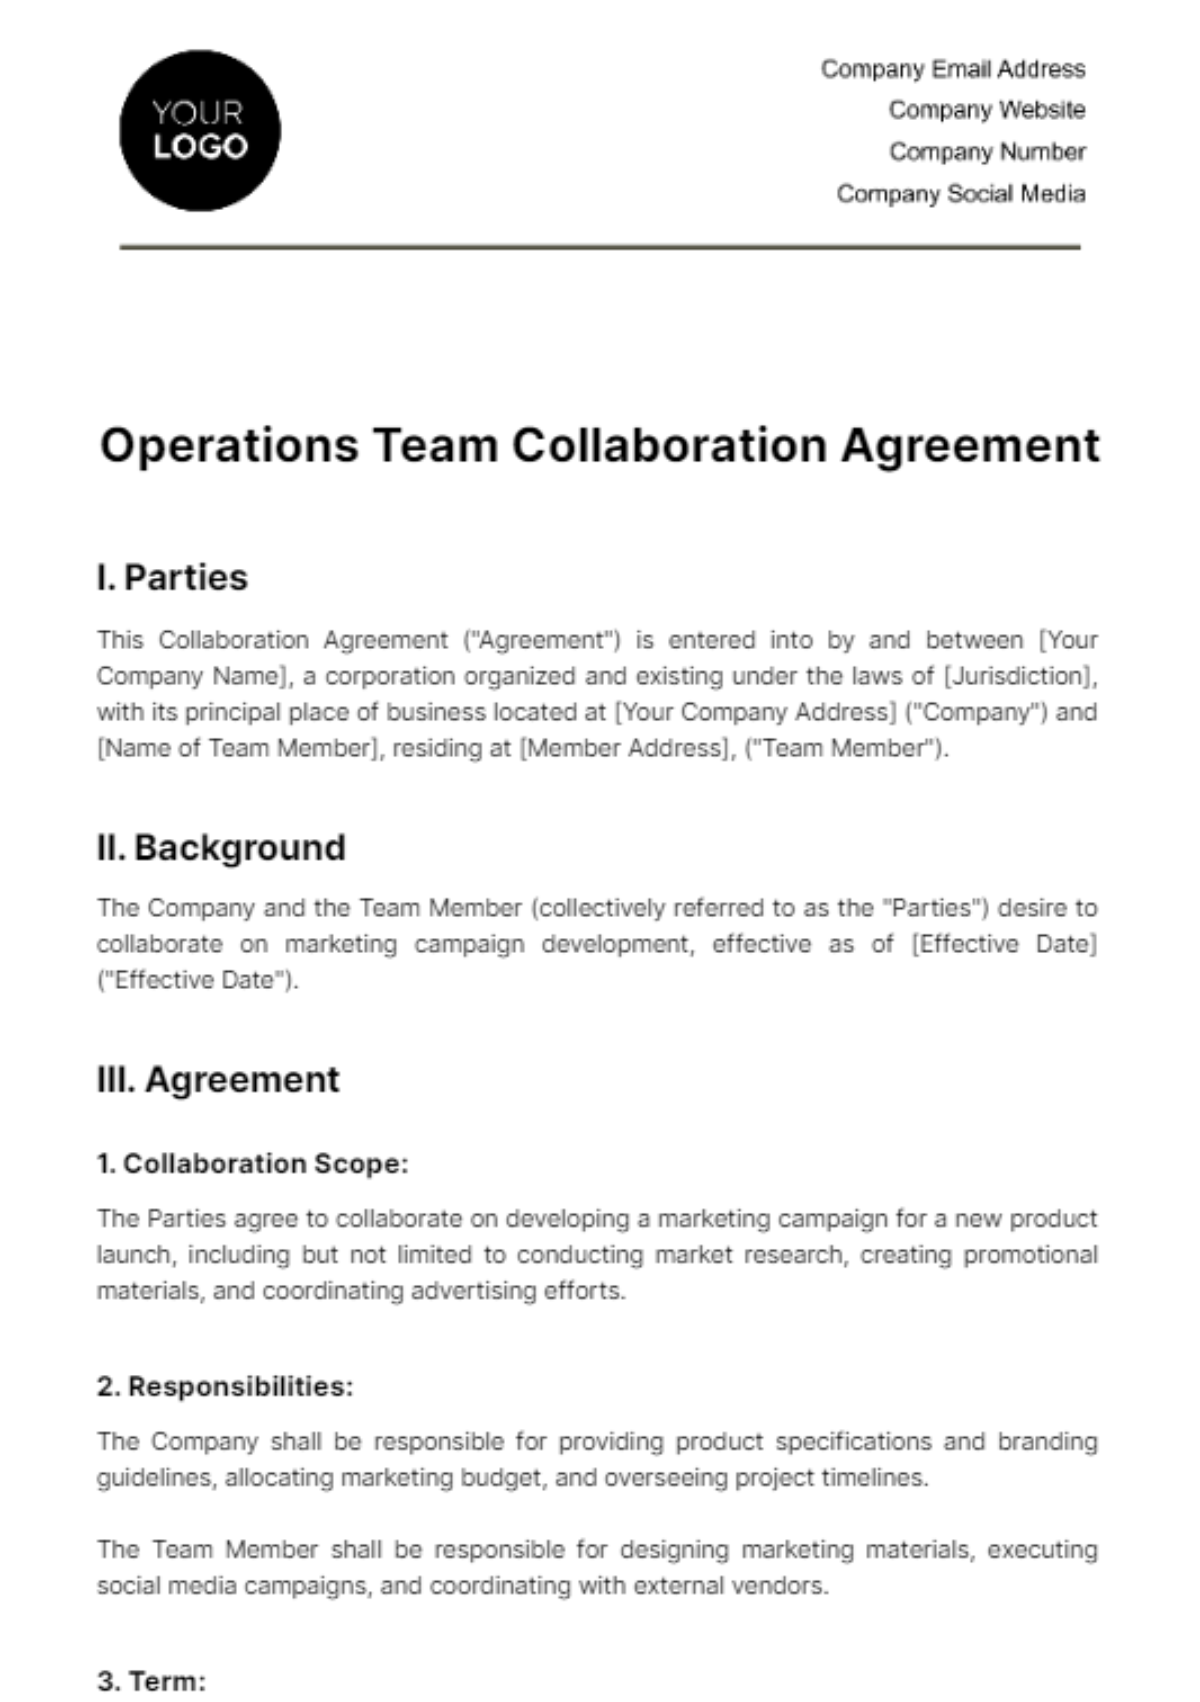 Free Operations Team Collaboration Agreement Template